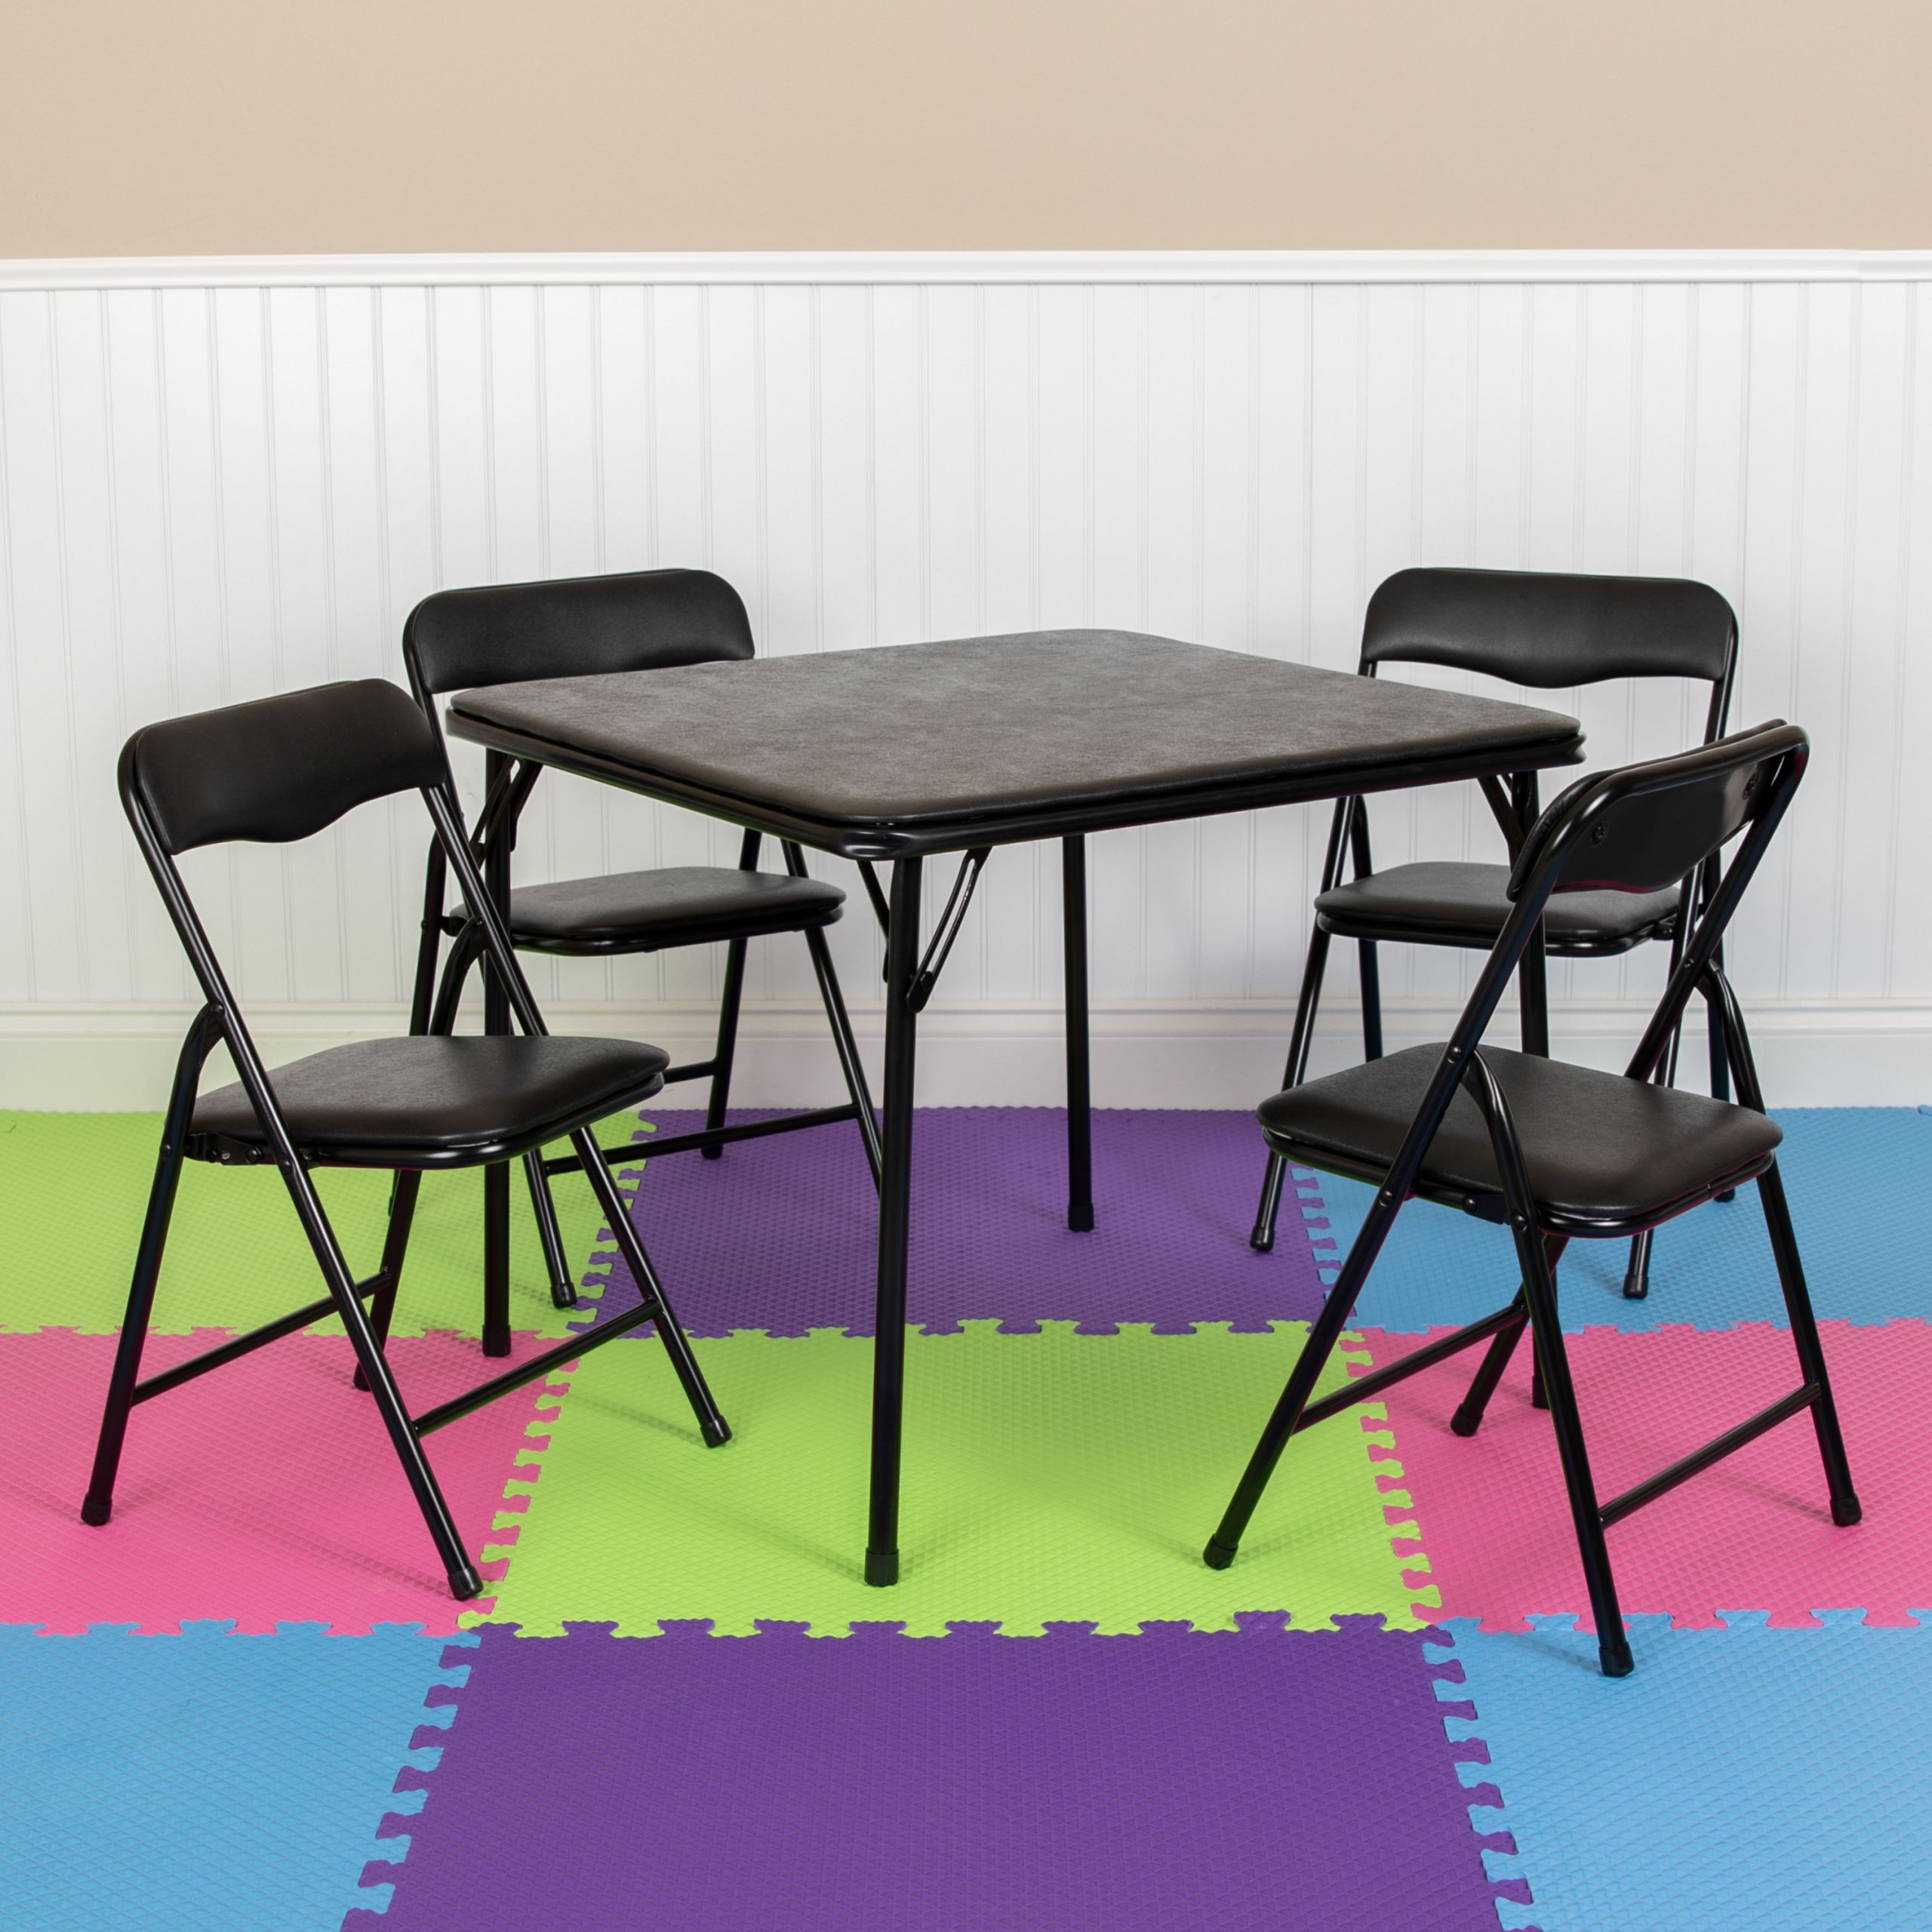 Kids Table Walmart
 Flash Furniture Kids Black 5 Piece Folding Table and Chair